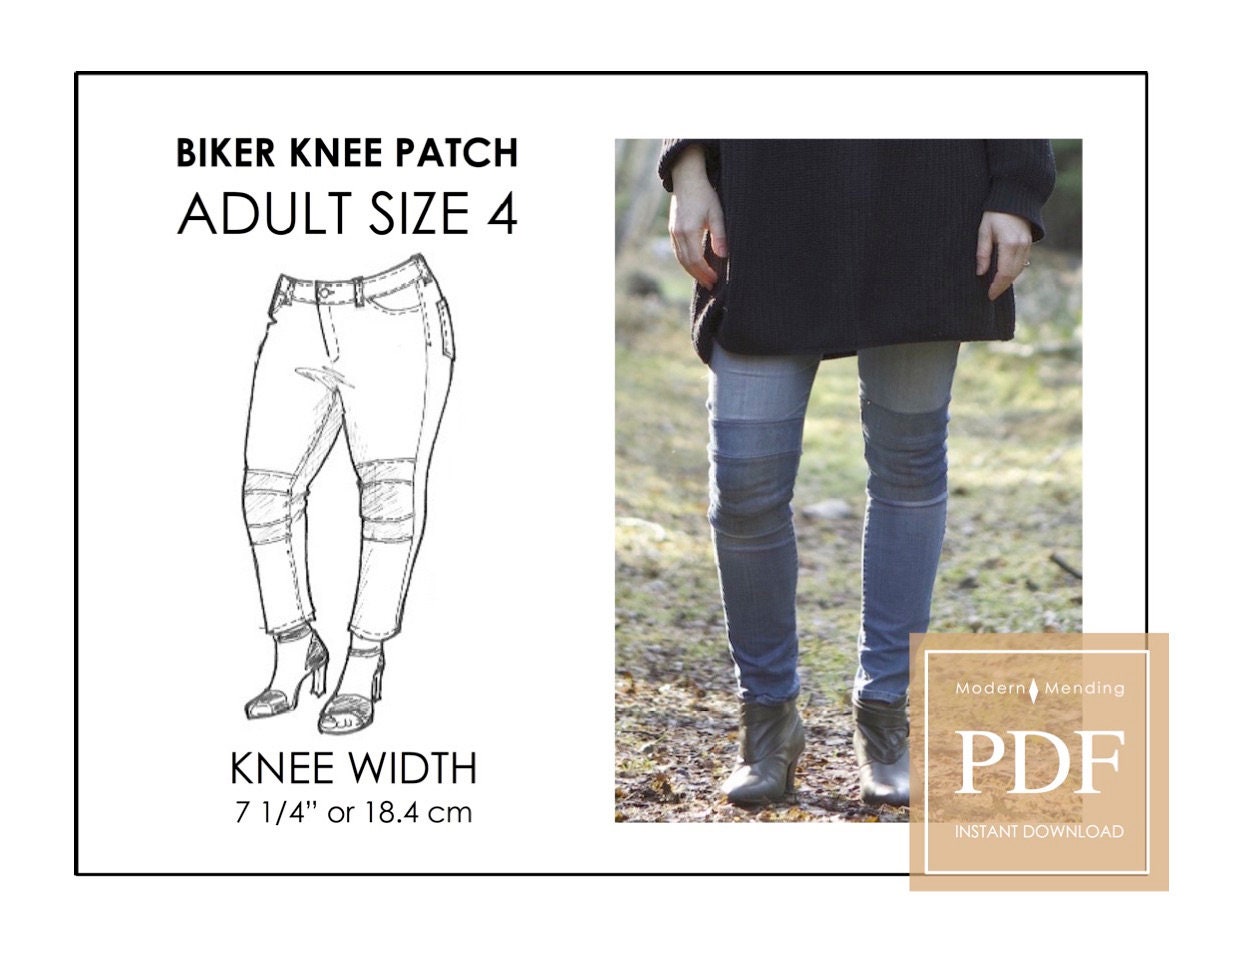 SIZE 1 Kids Biker Knee Patch Pattern & Tutorial. Jeans Patch DIY for  Toddler, Kids. PDF Downloadable Learn to Sew. Children Size 18M to 4. 